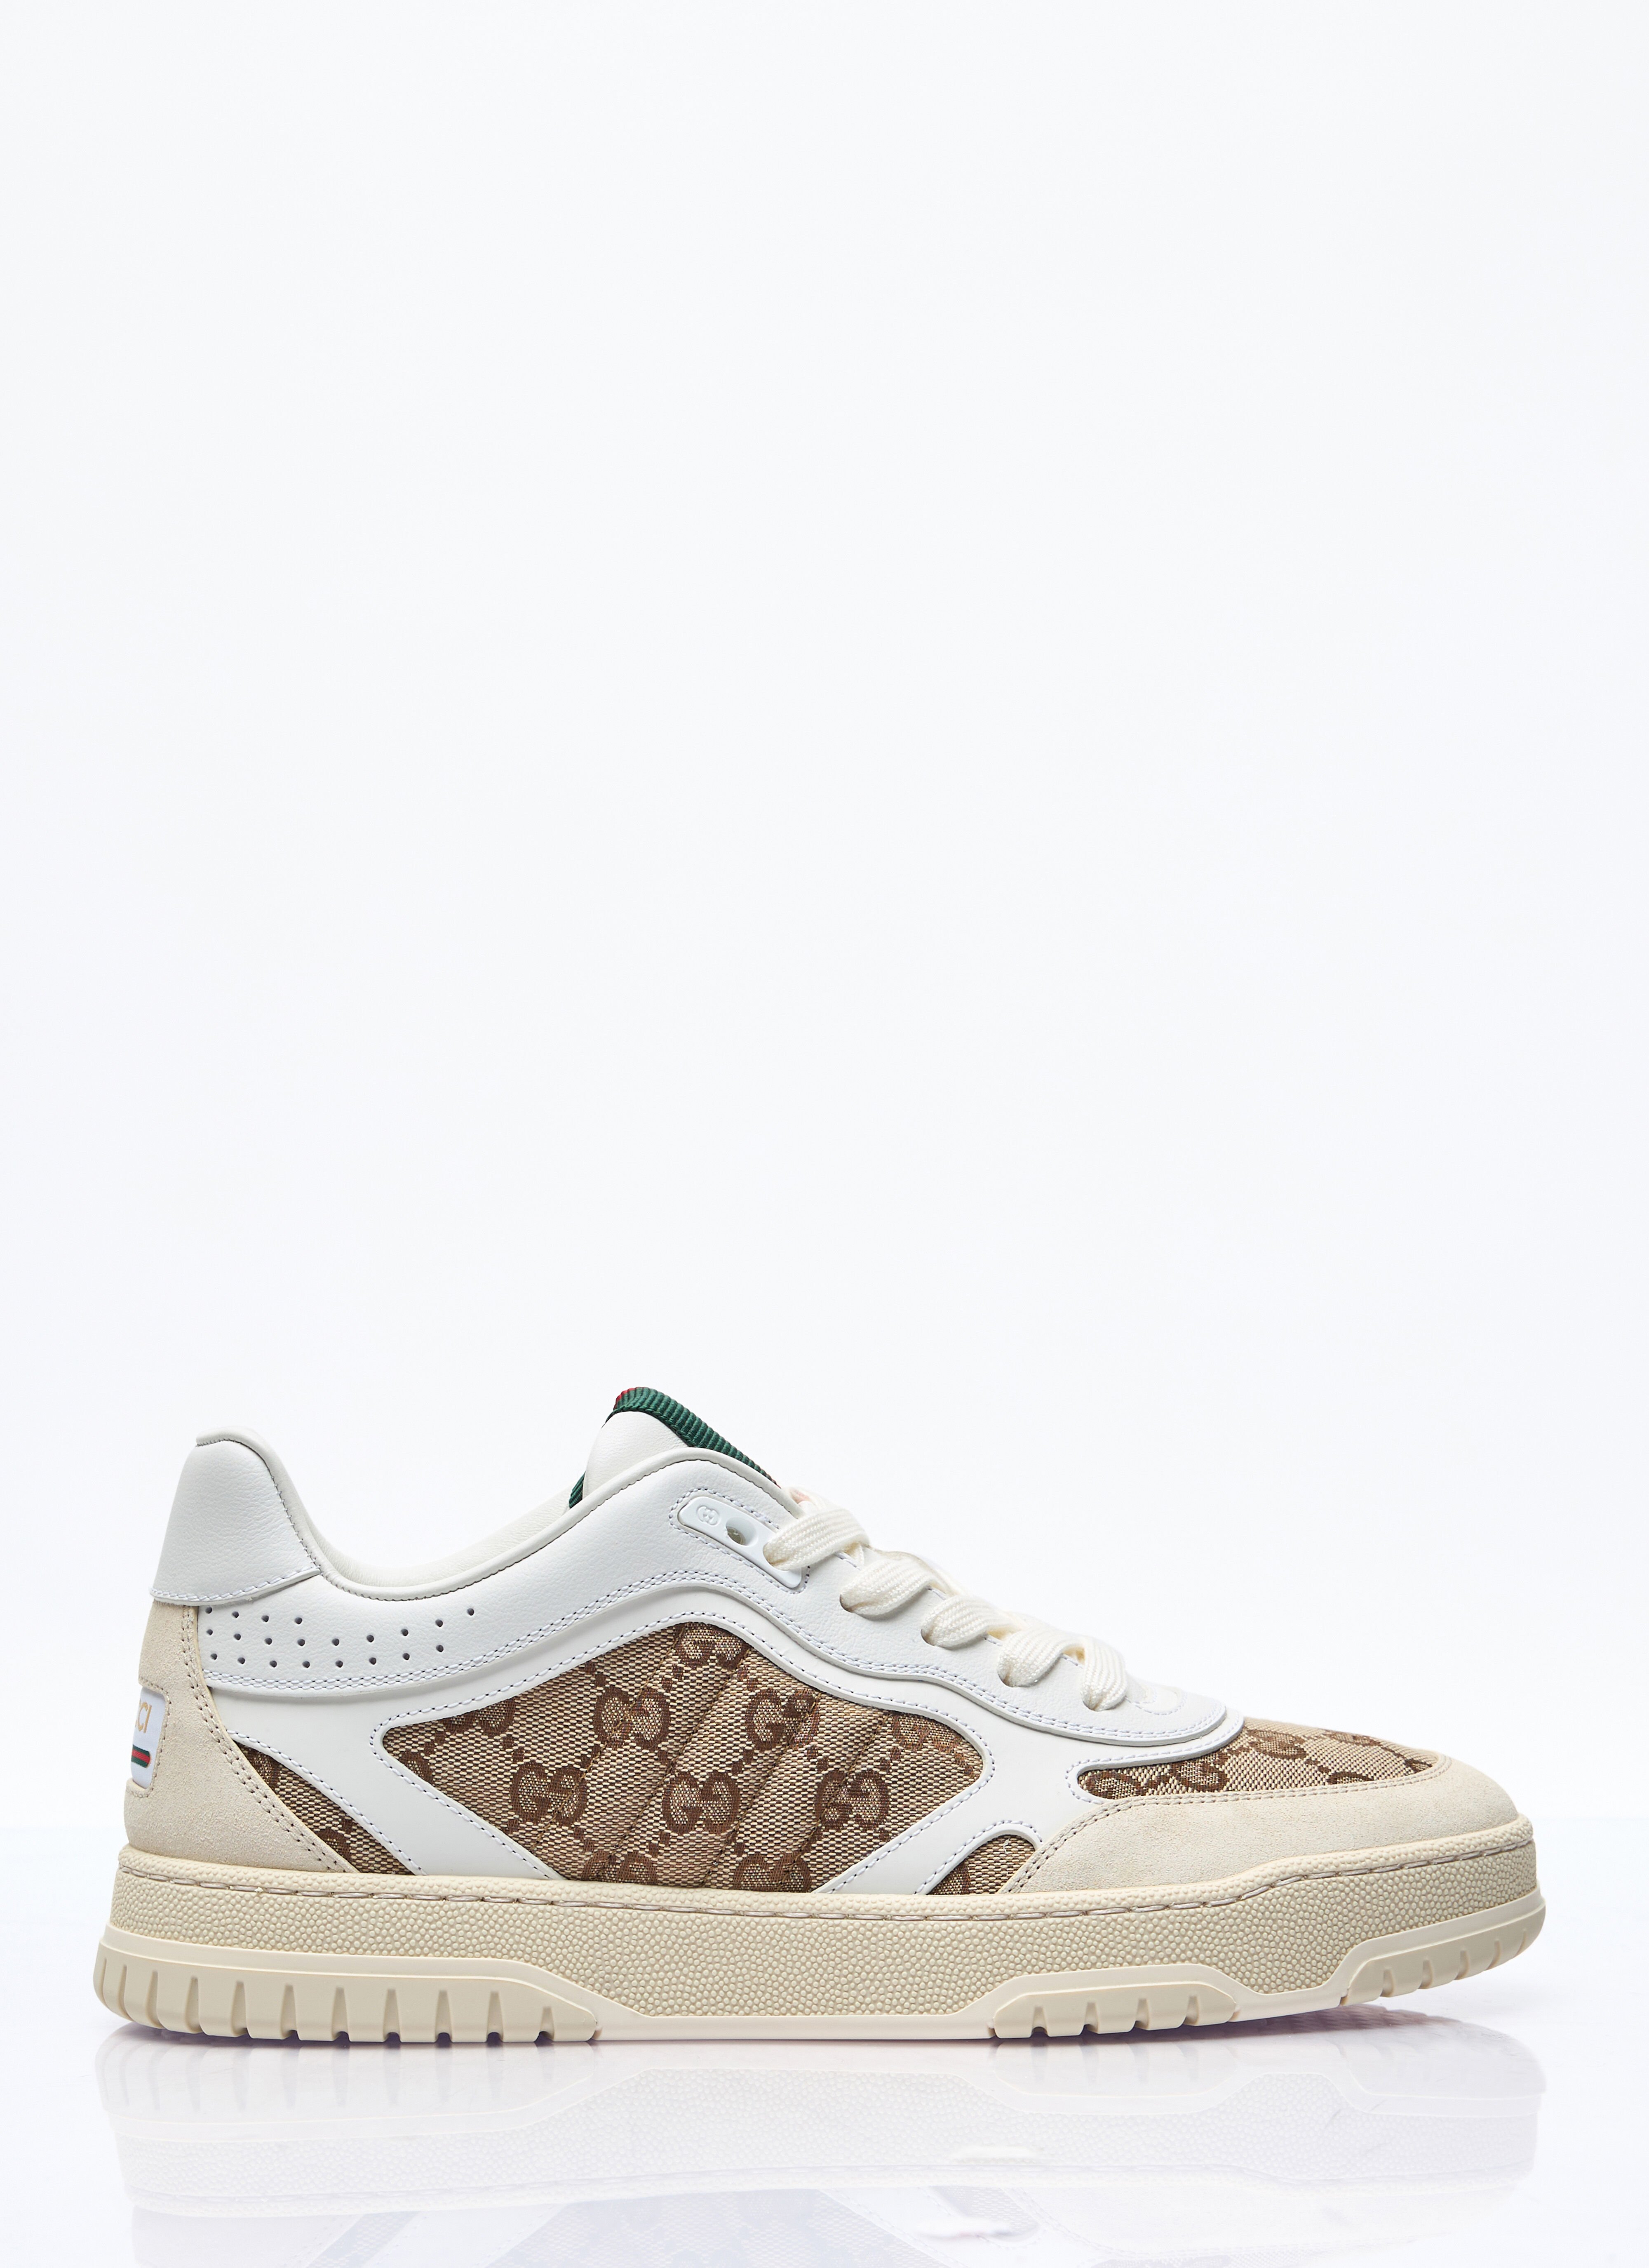 Gucci Re-Web Sneakers 白色 guc0257008